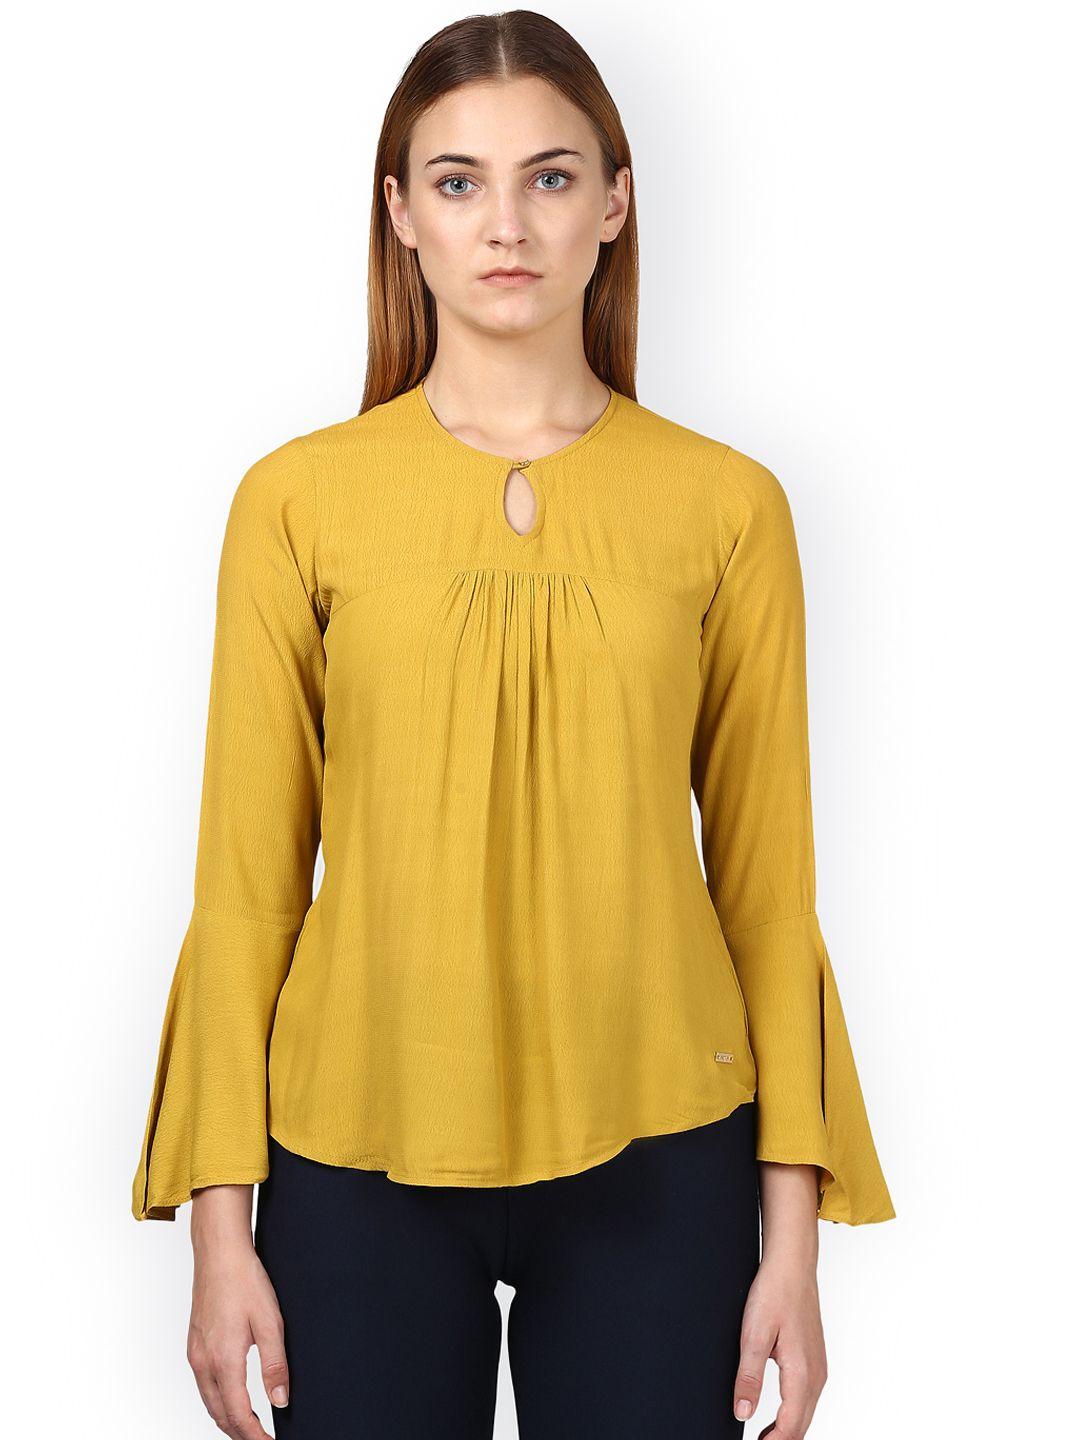 park avenue women mustard yellow solid a-line top